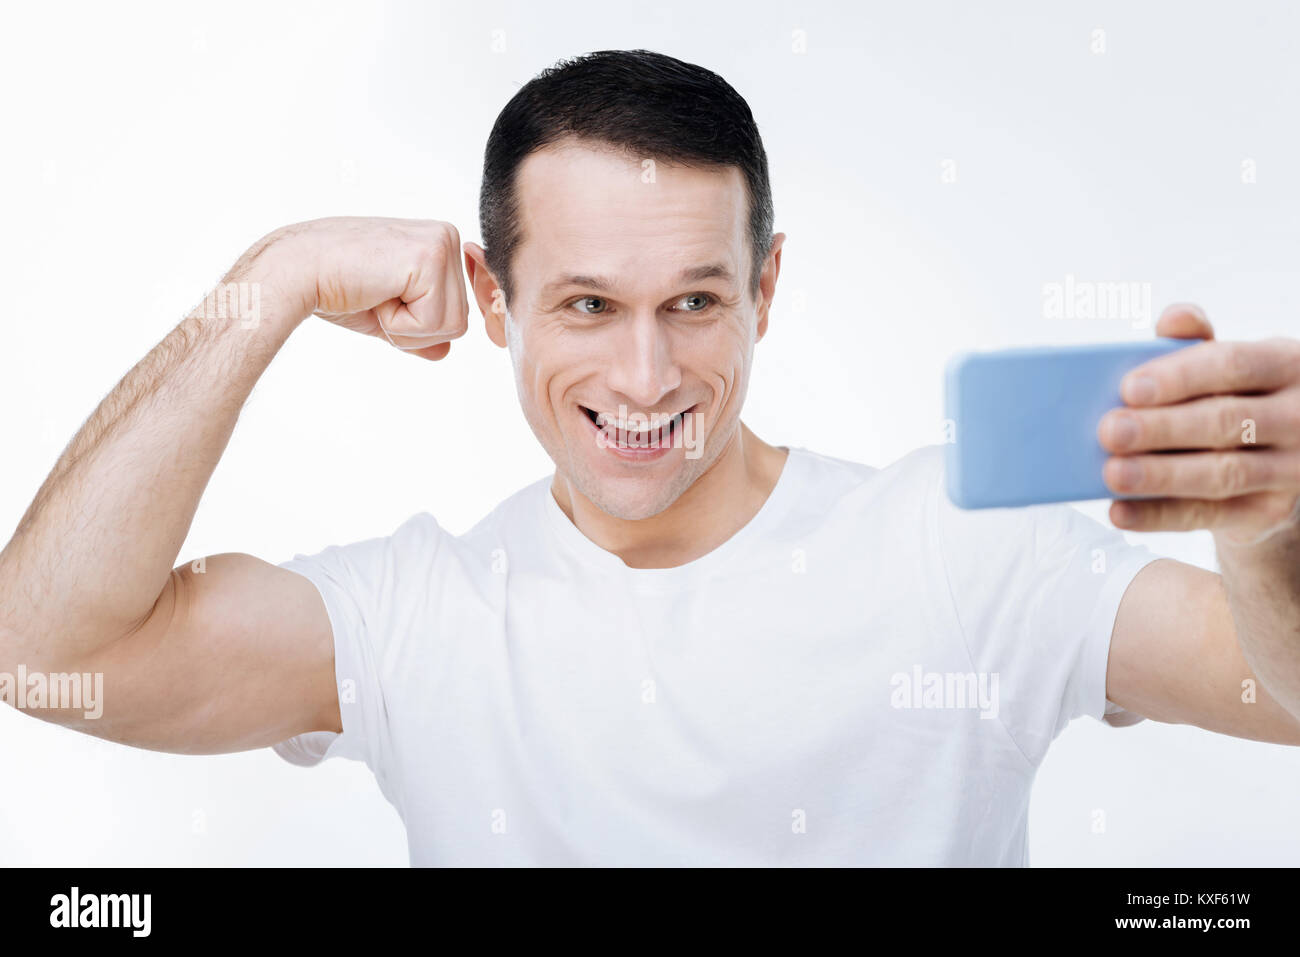 Strong well built man showing his biceps Stock Photo